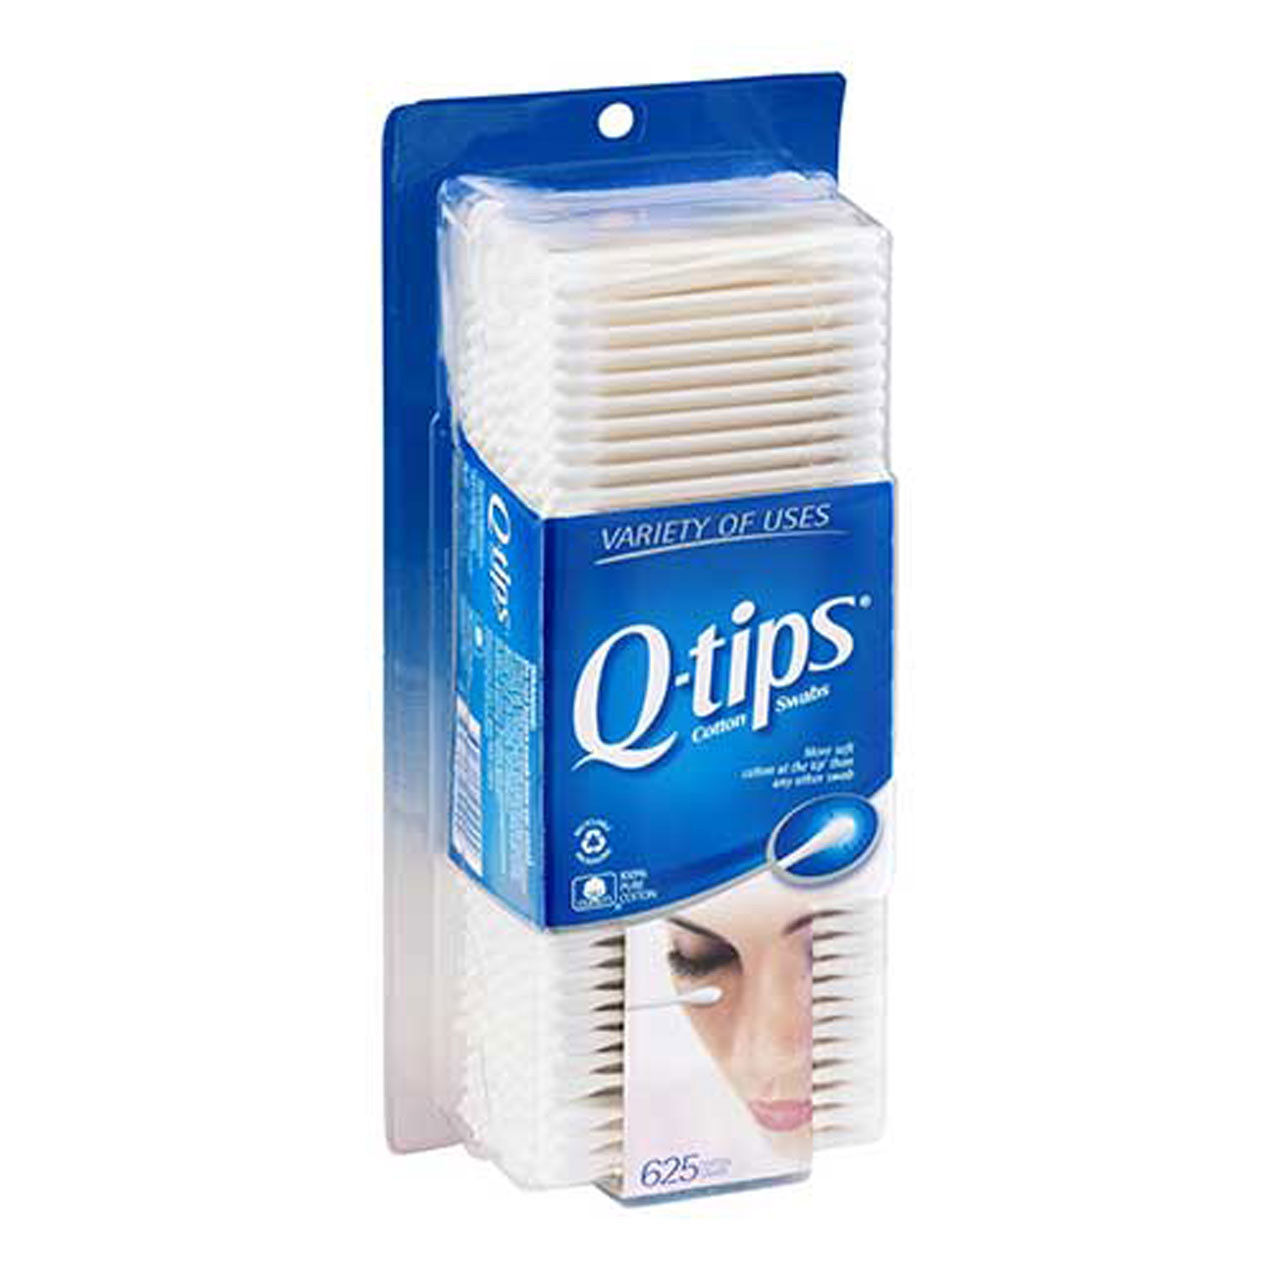 Are Q-tips good or bad for you?